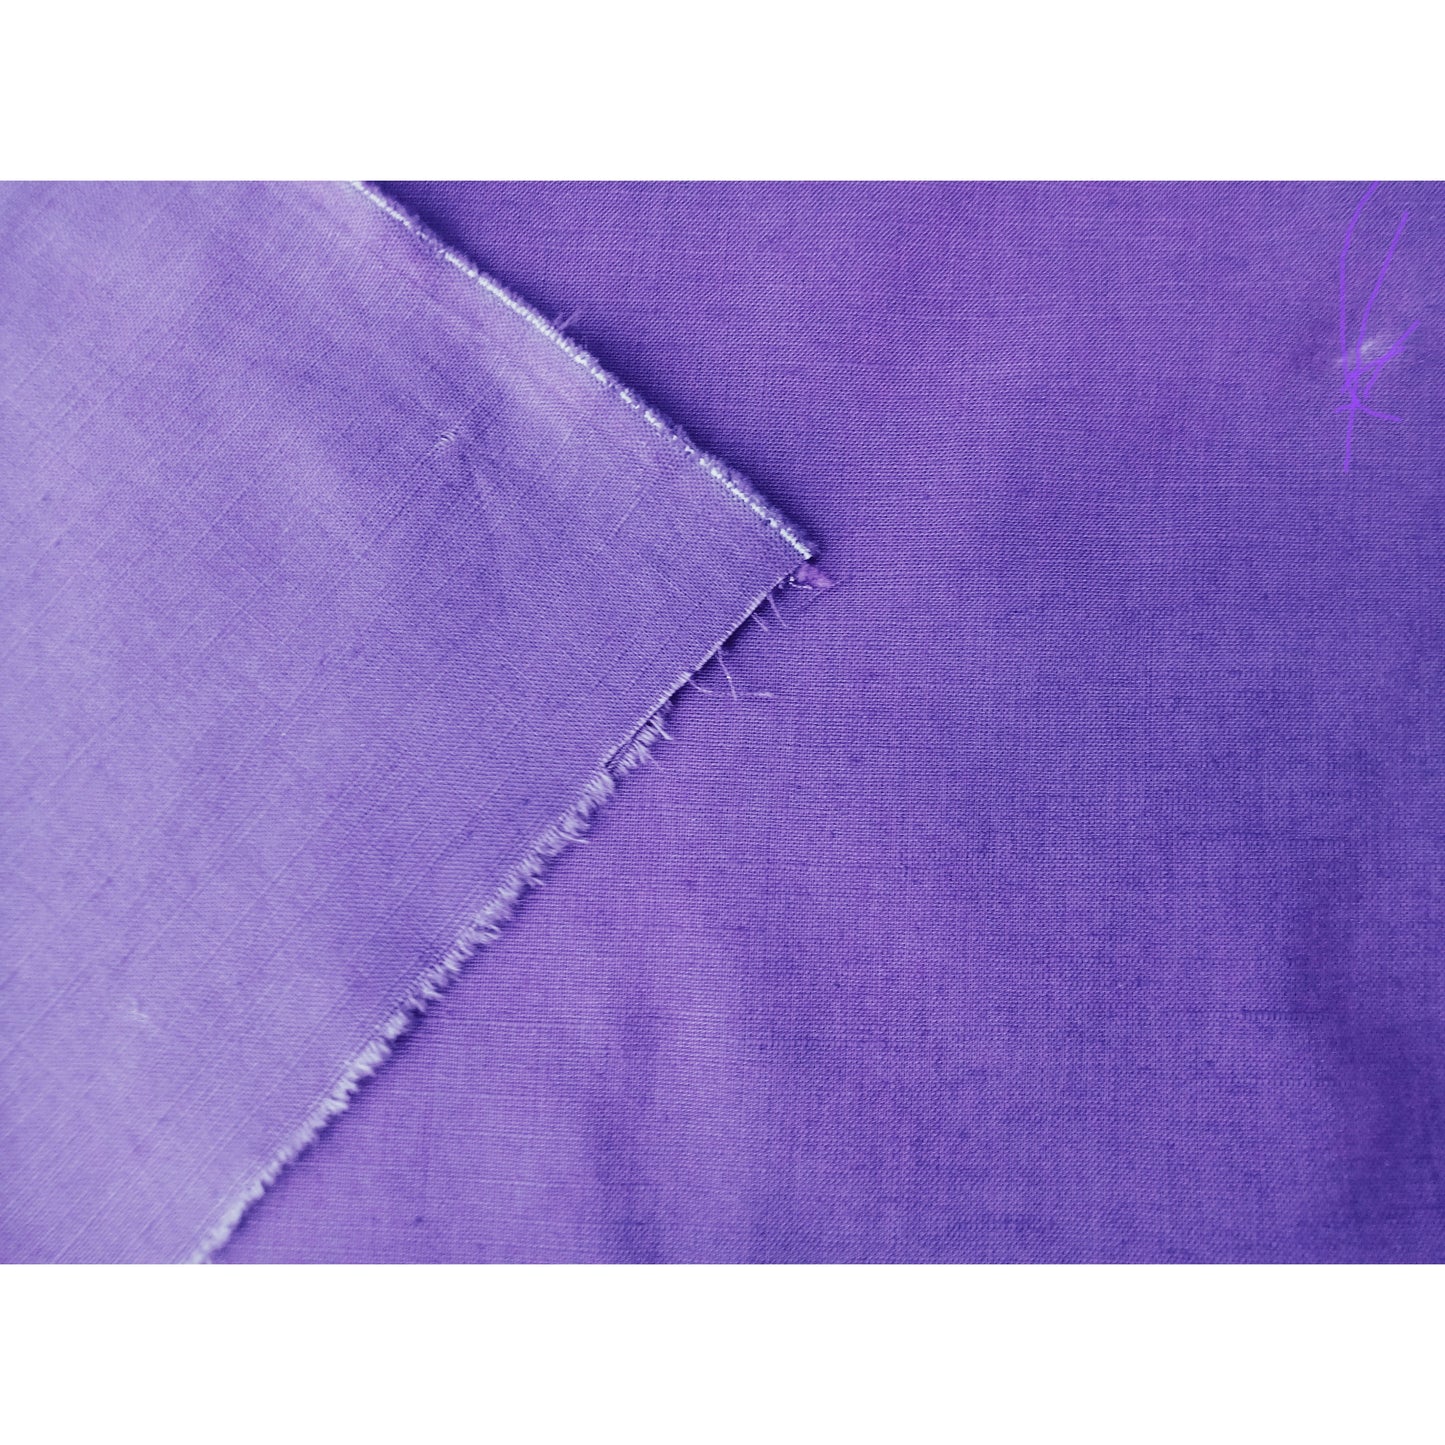 Indi - purple woven cotton linen shimmer - sold by 1/2mtr